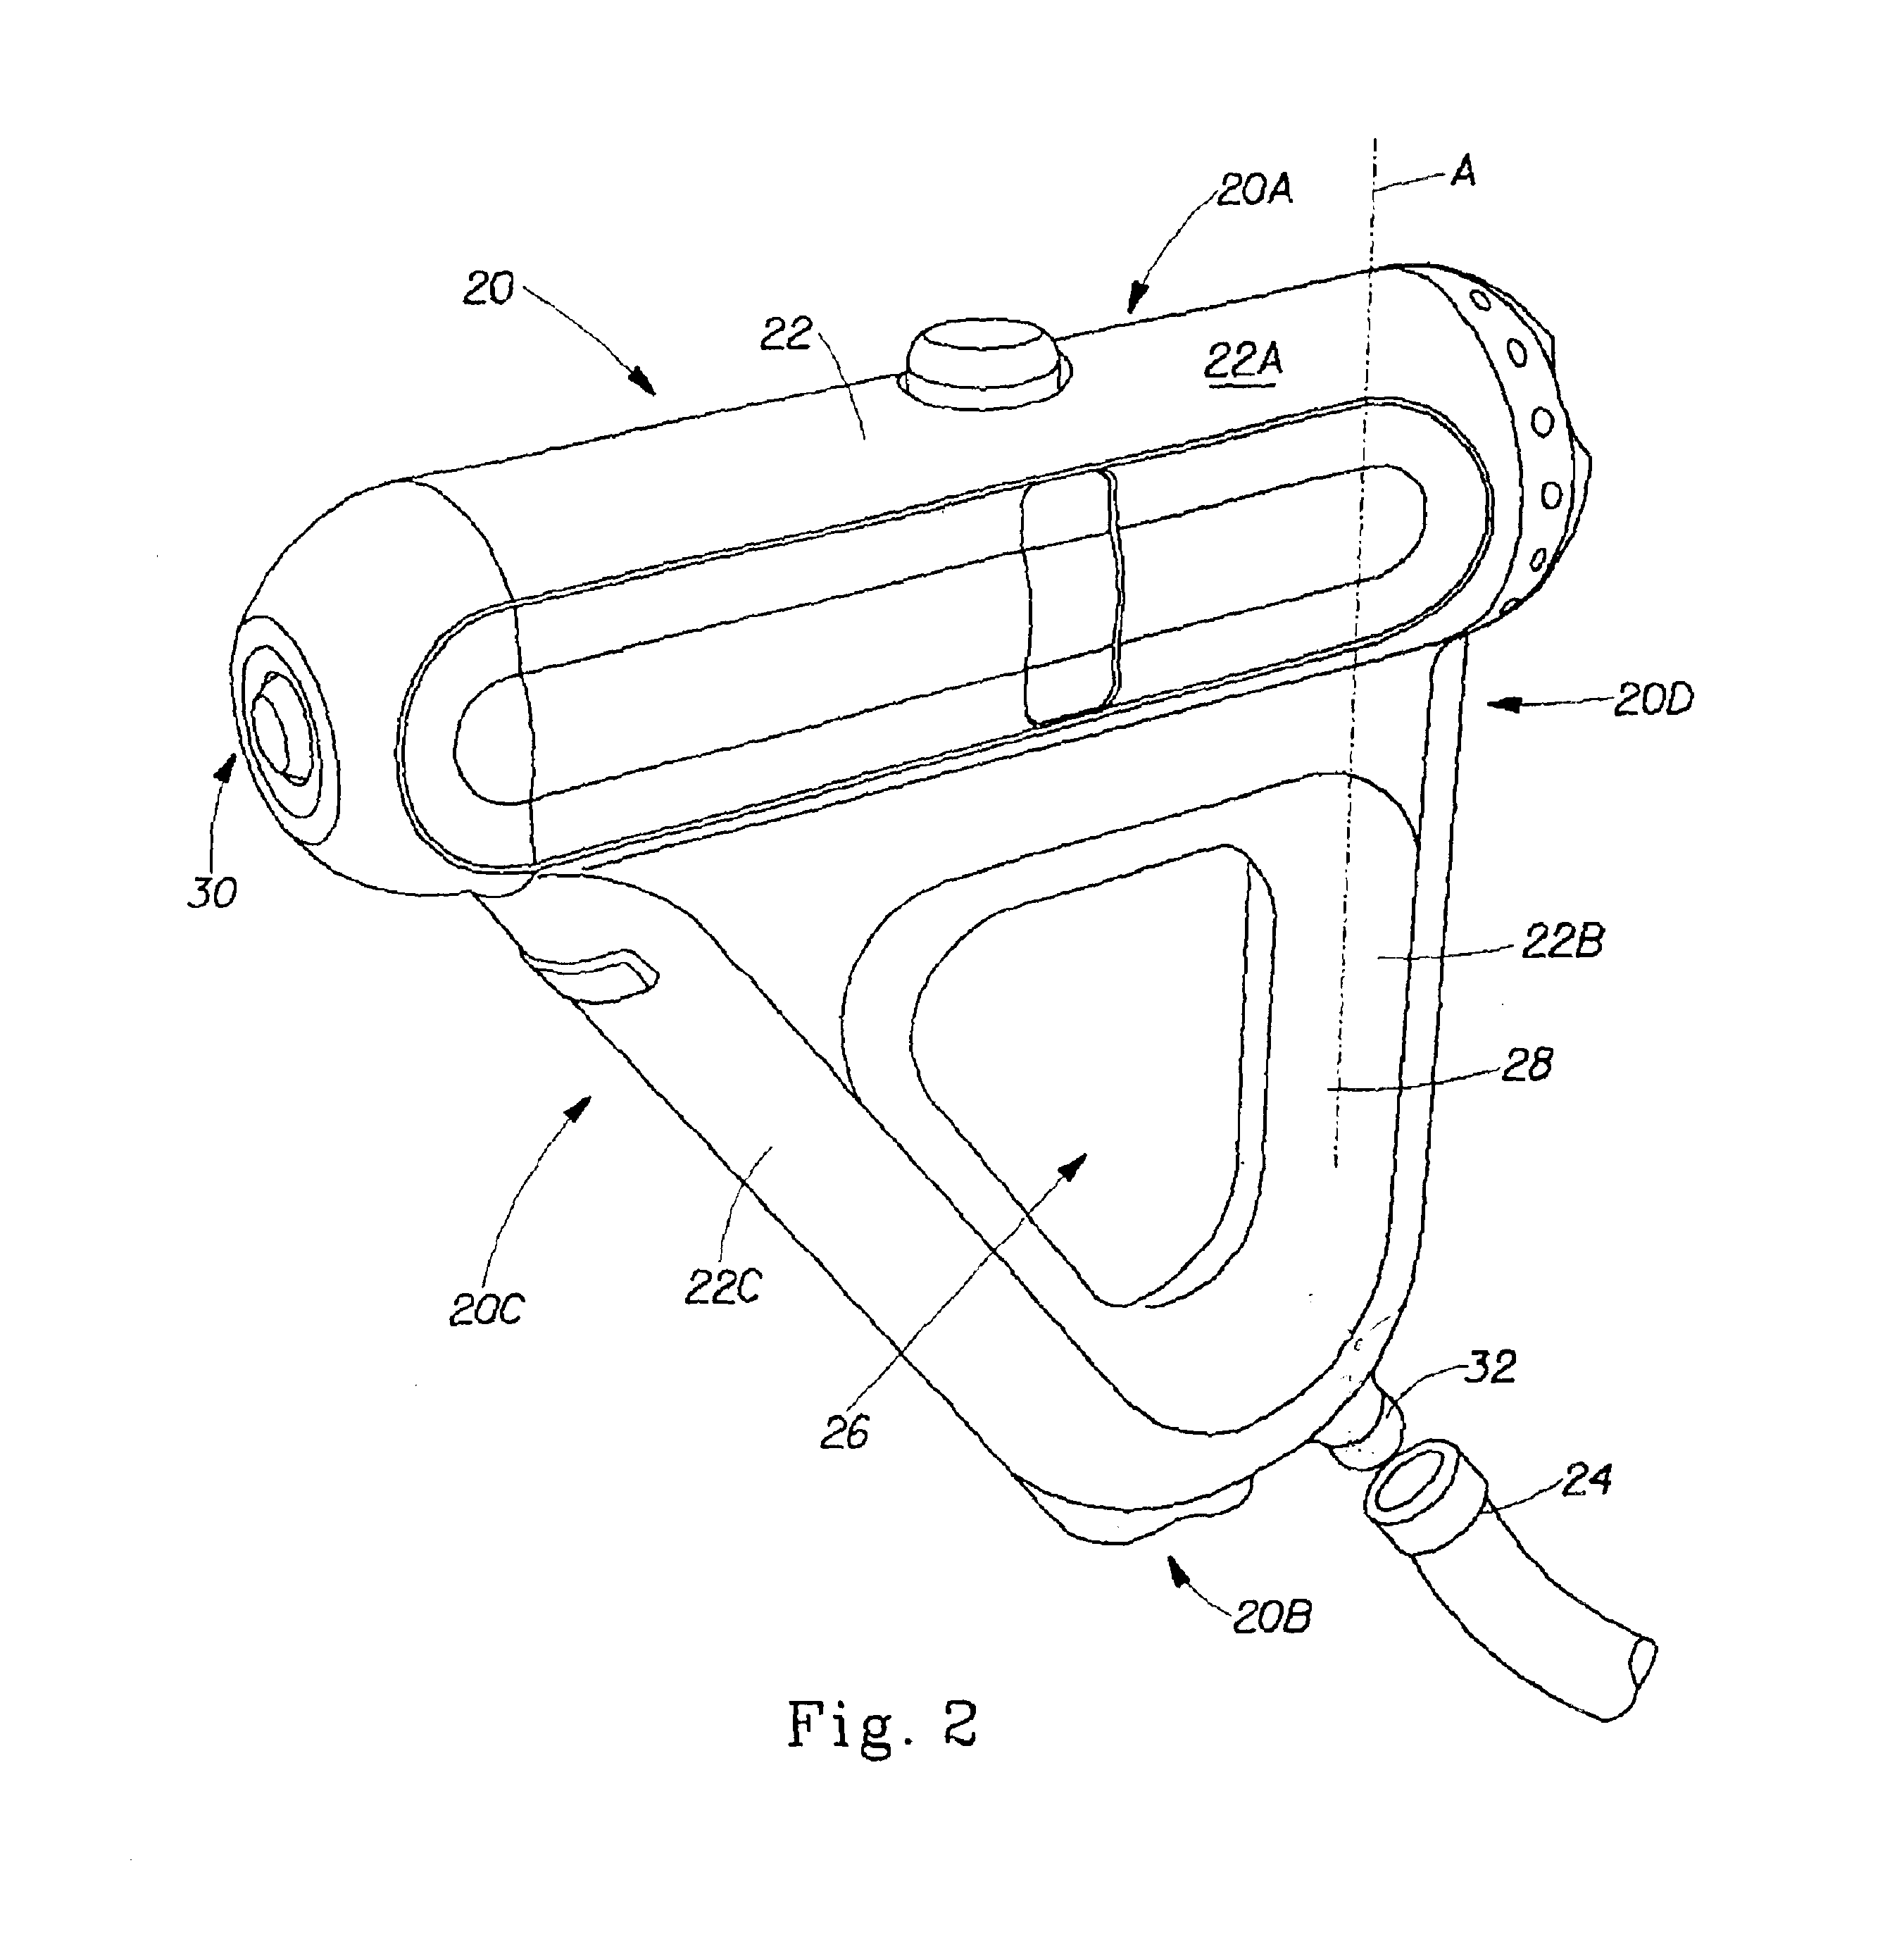 System and method for cleaning and/or treating vehicles and the surfaces of other objects